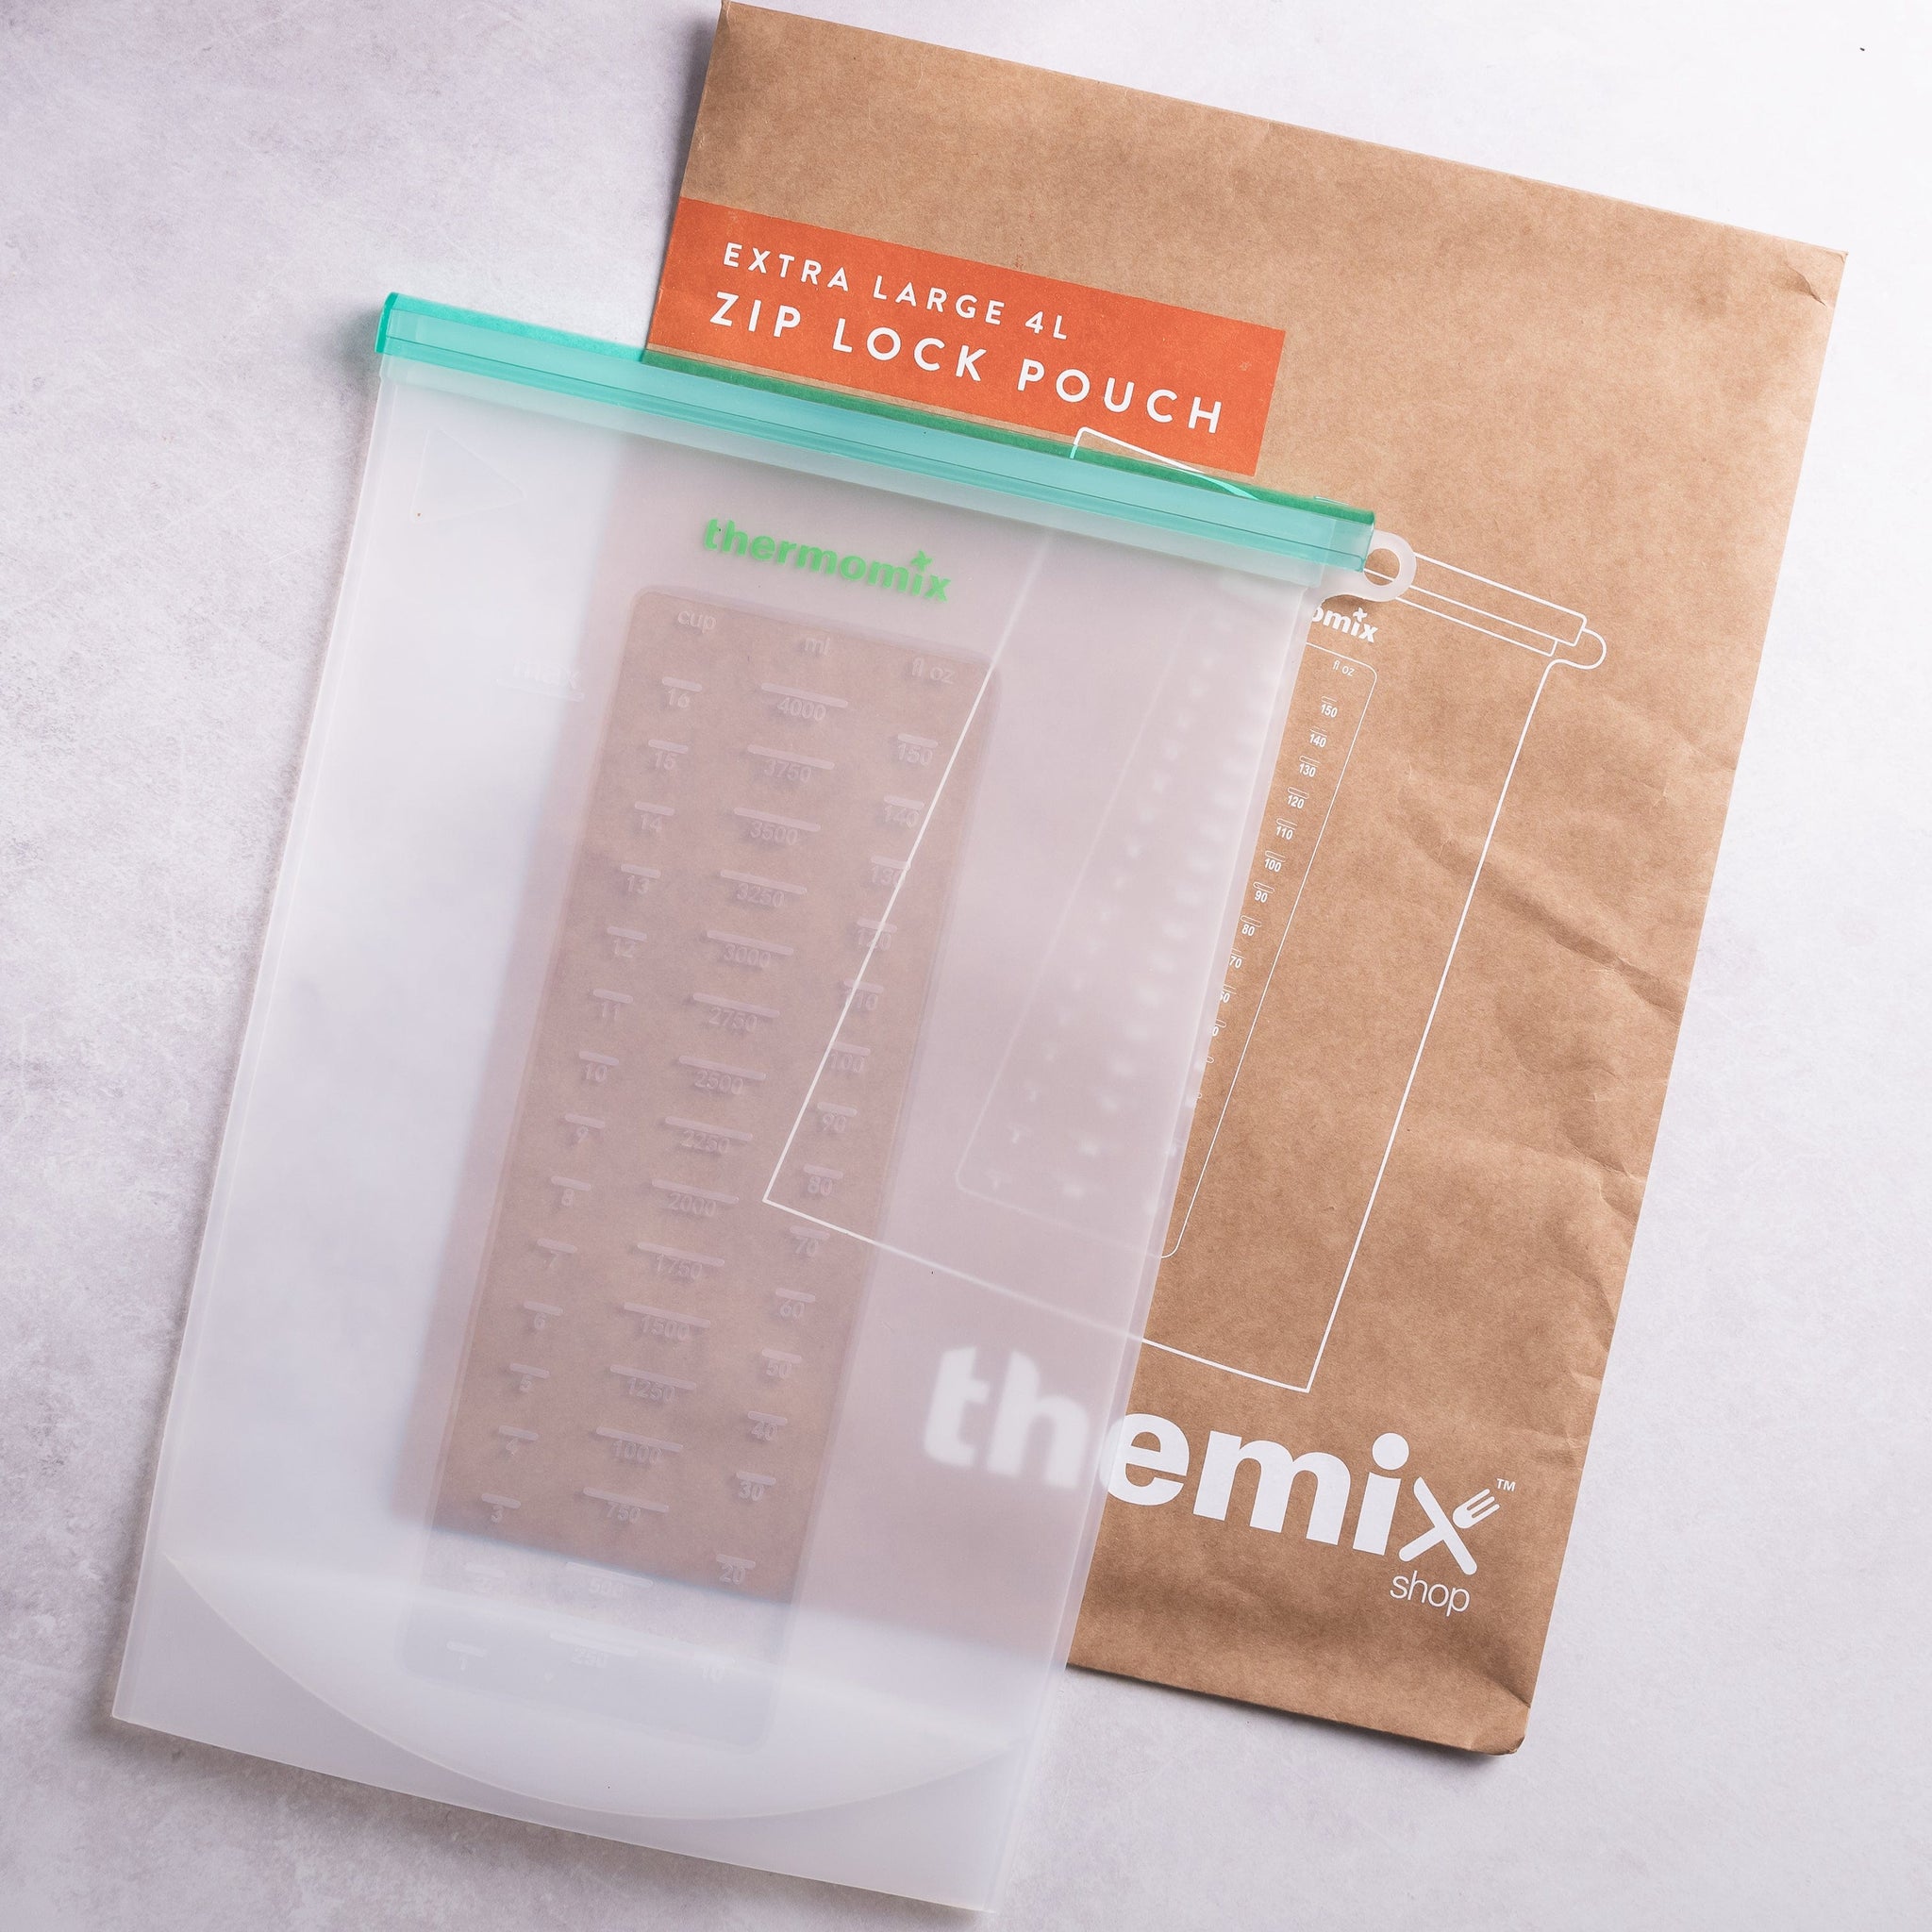 Thermomix-New-Zealand TheMix Shop Zip Lock Pouch Storage Green Extra Large (4L)